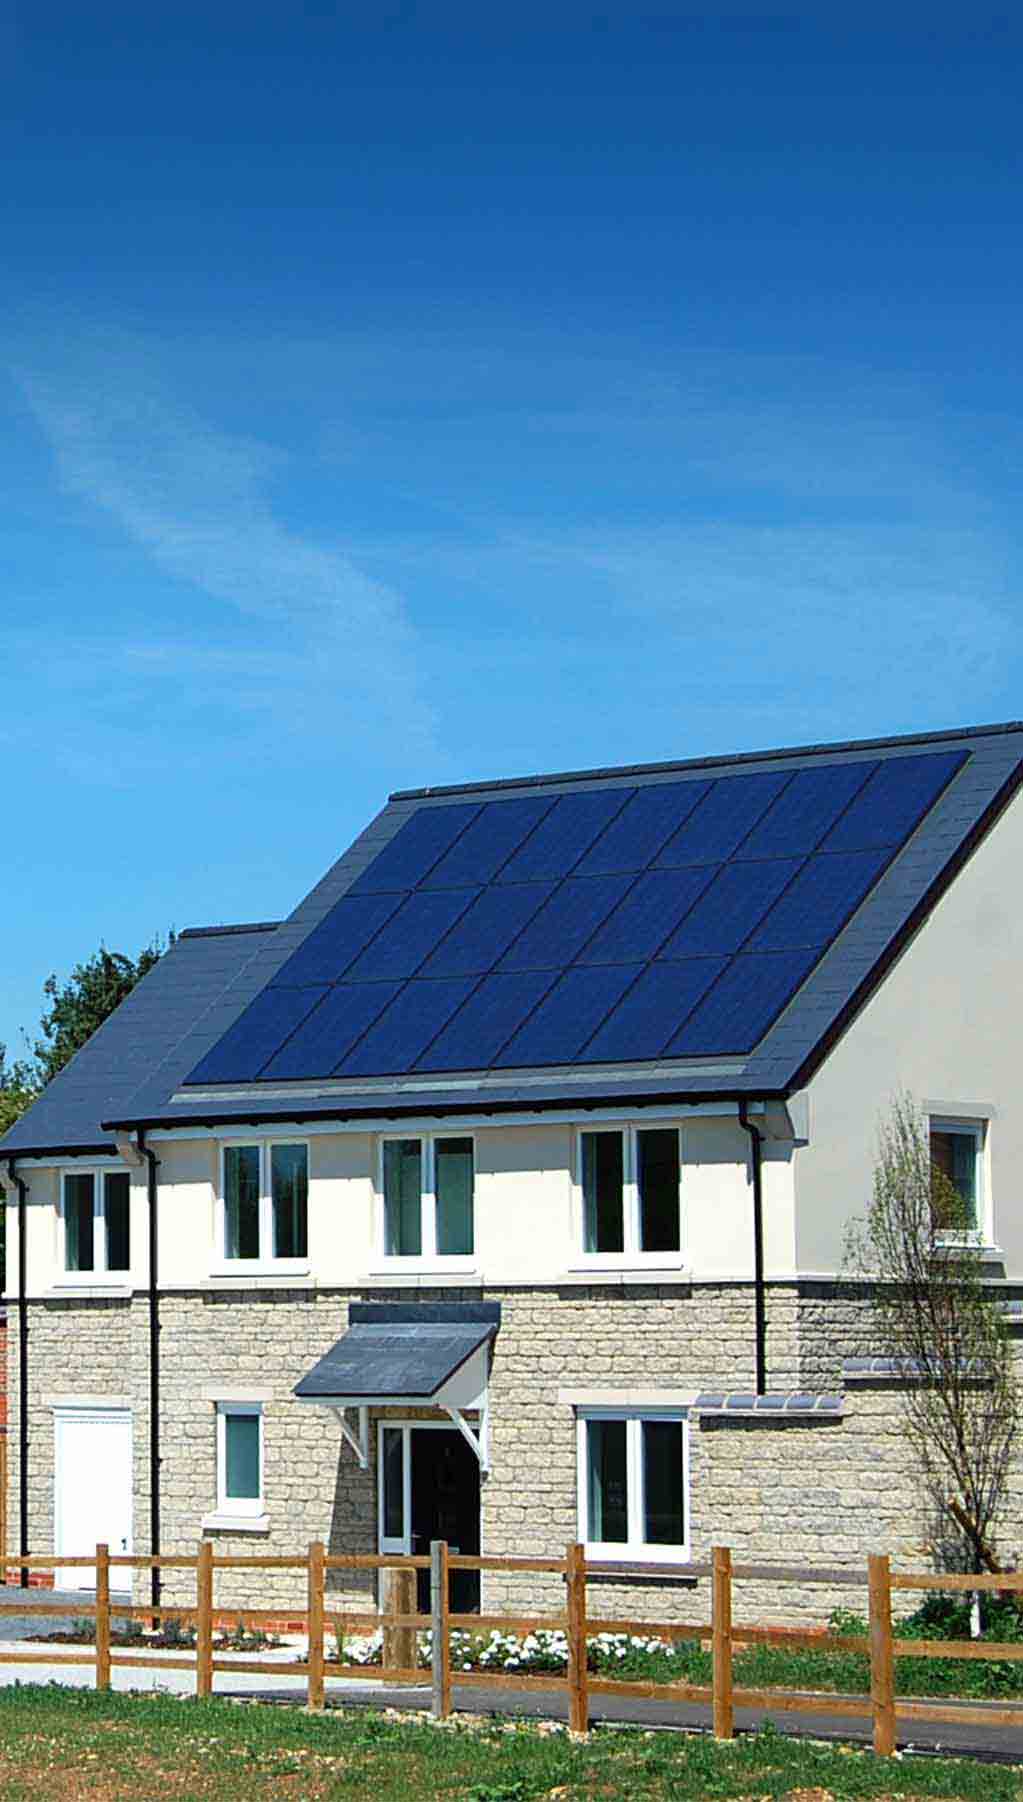 Solar panels on a new build home